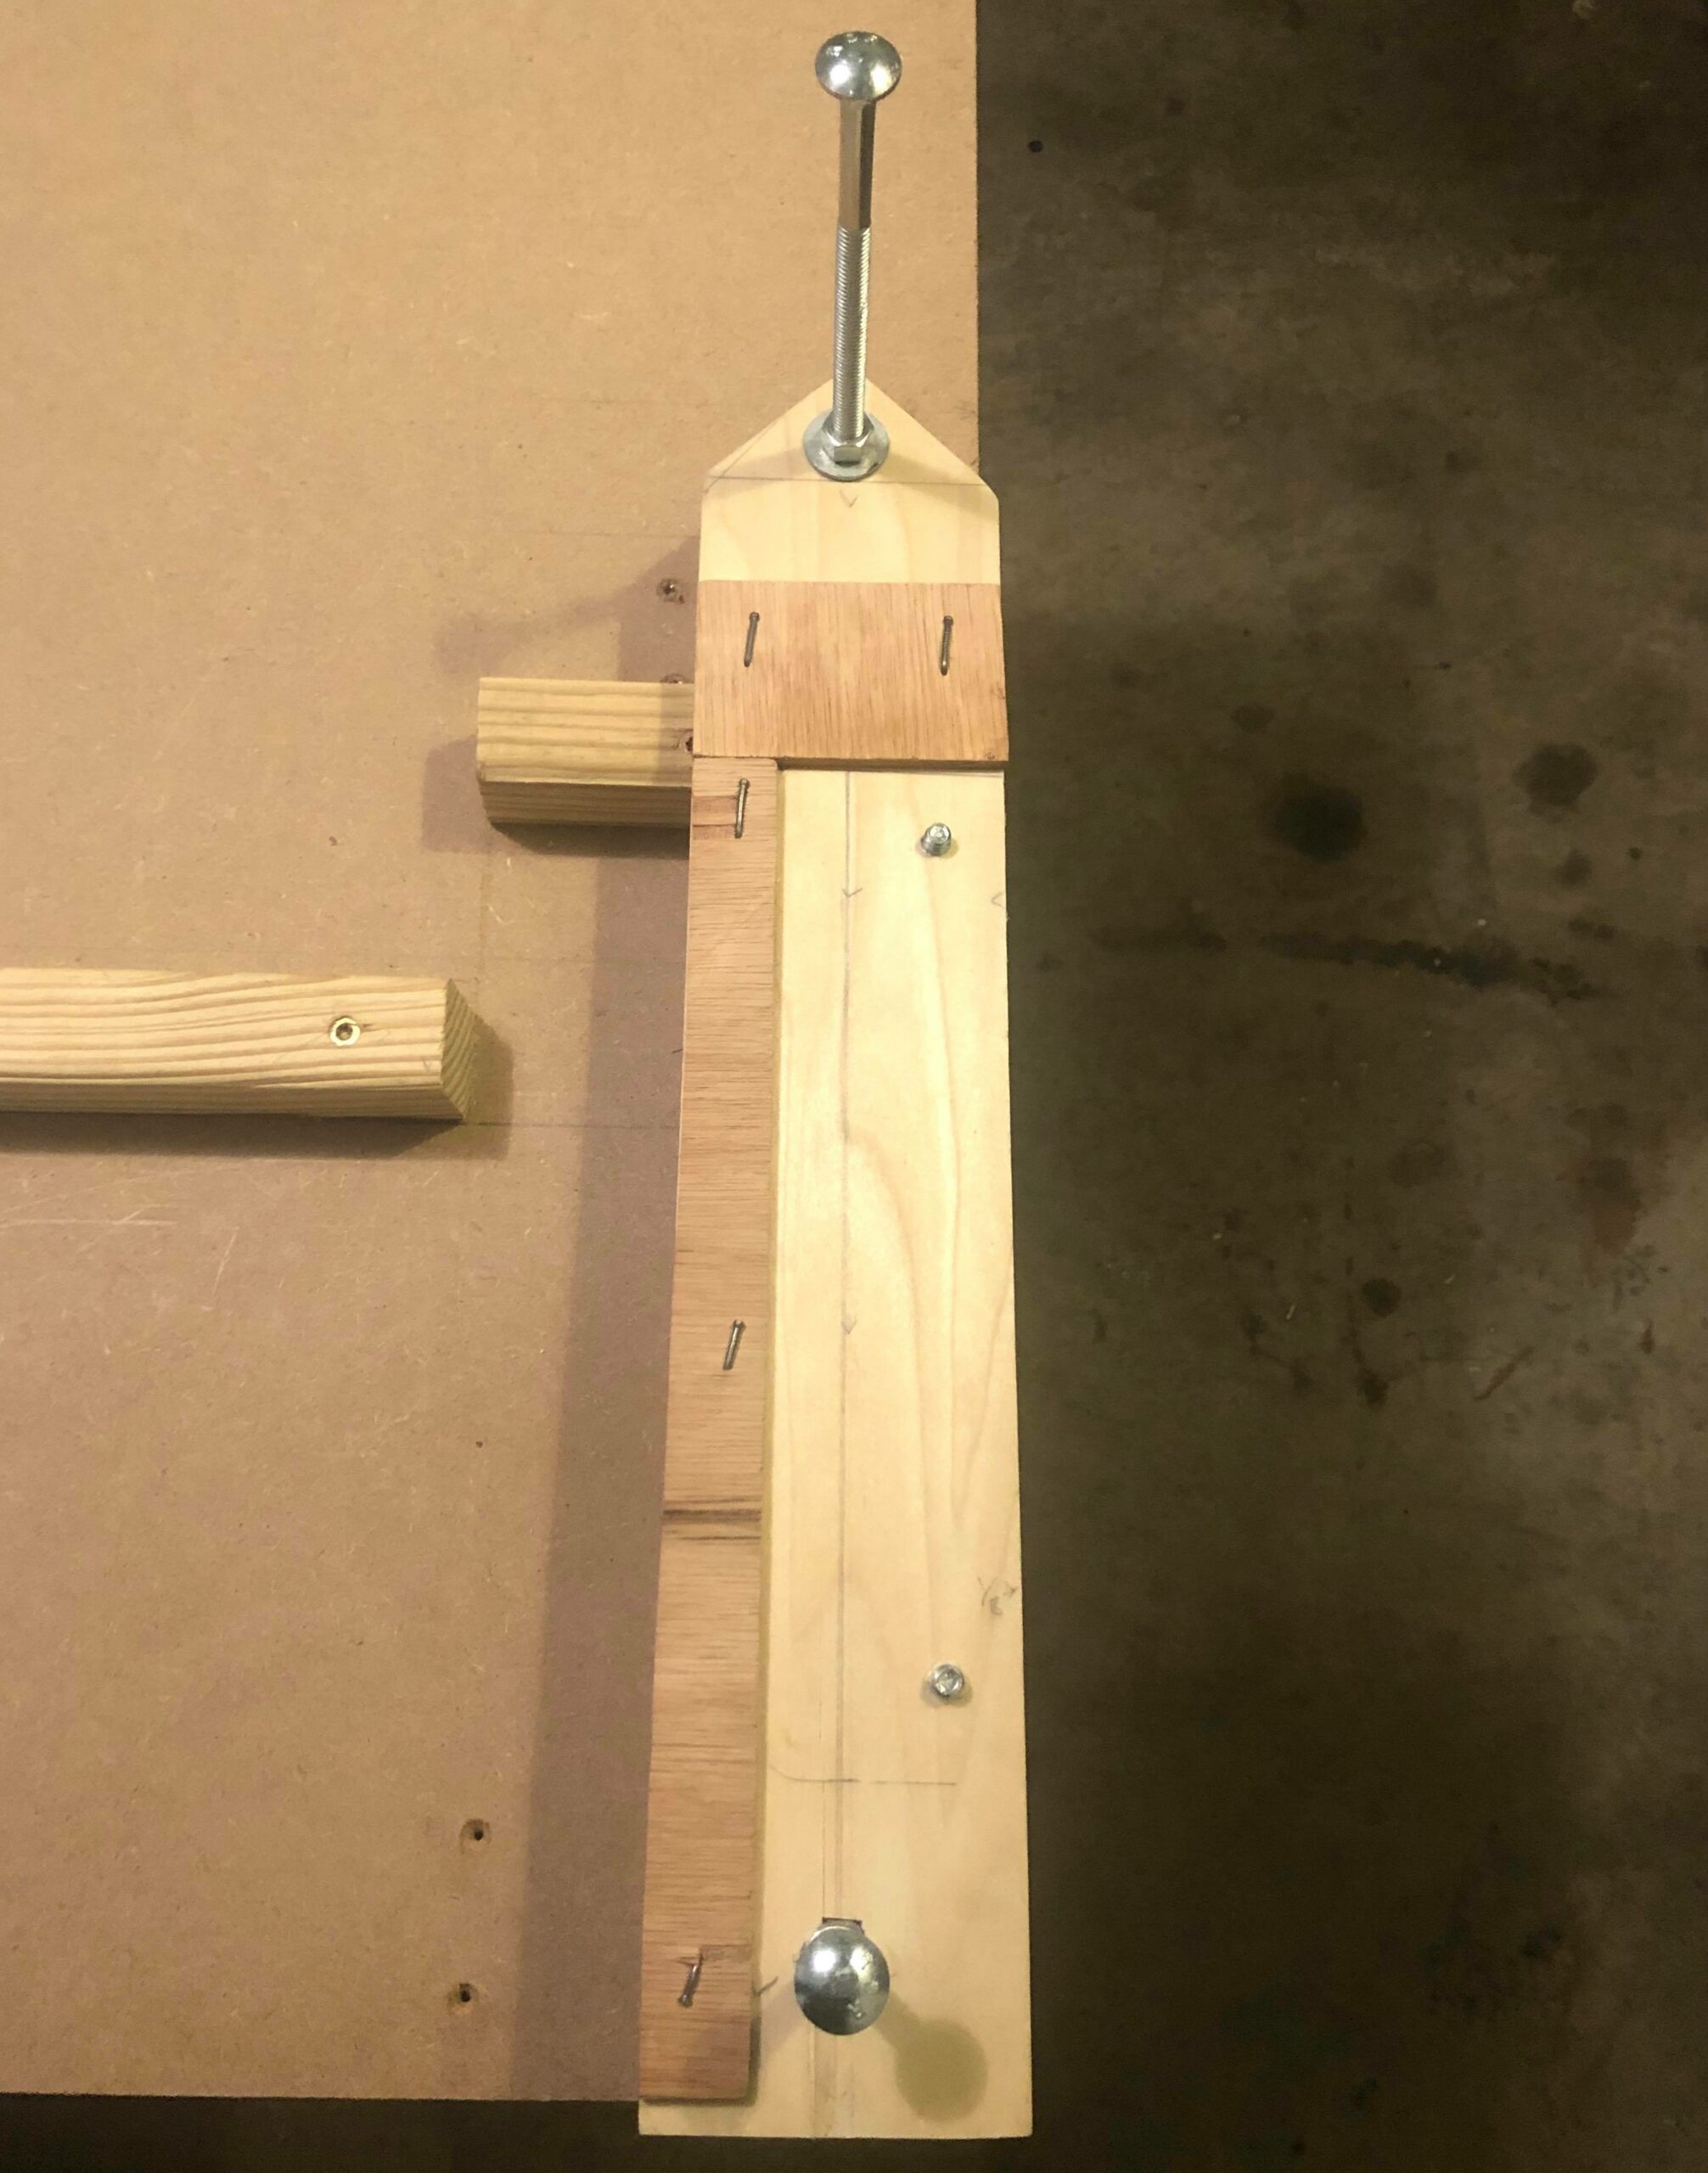 a chop saw jig saw platform, with bolts and a Lauan plywood fence